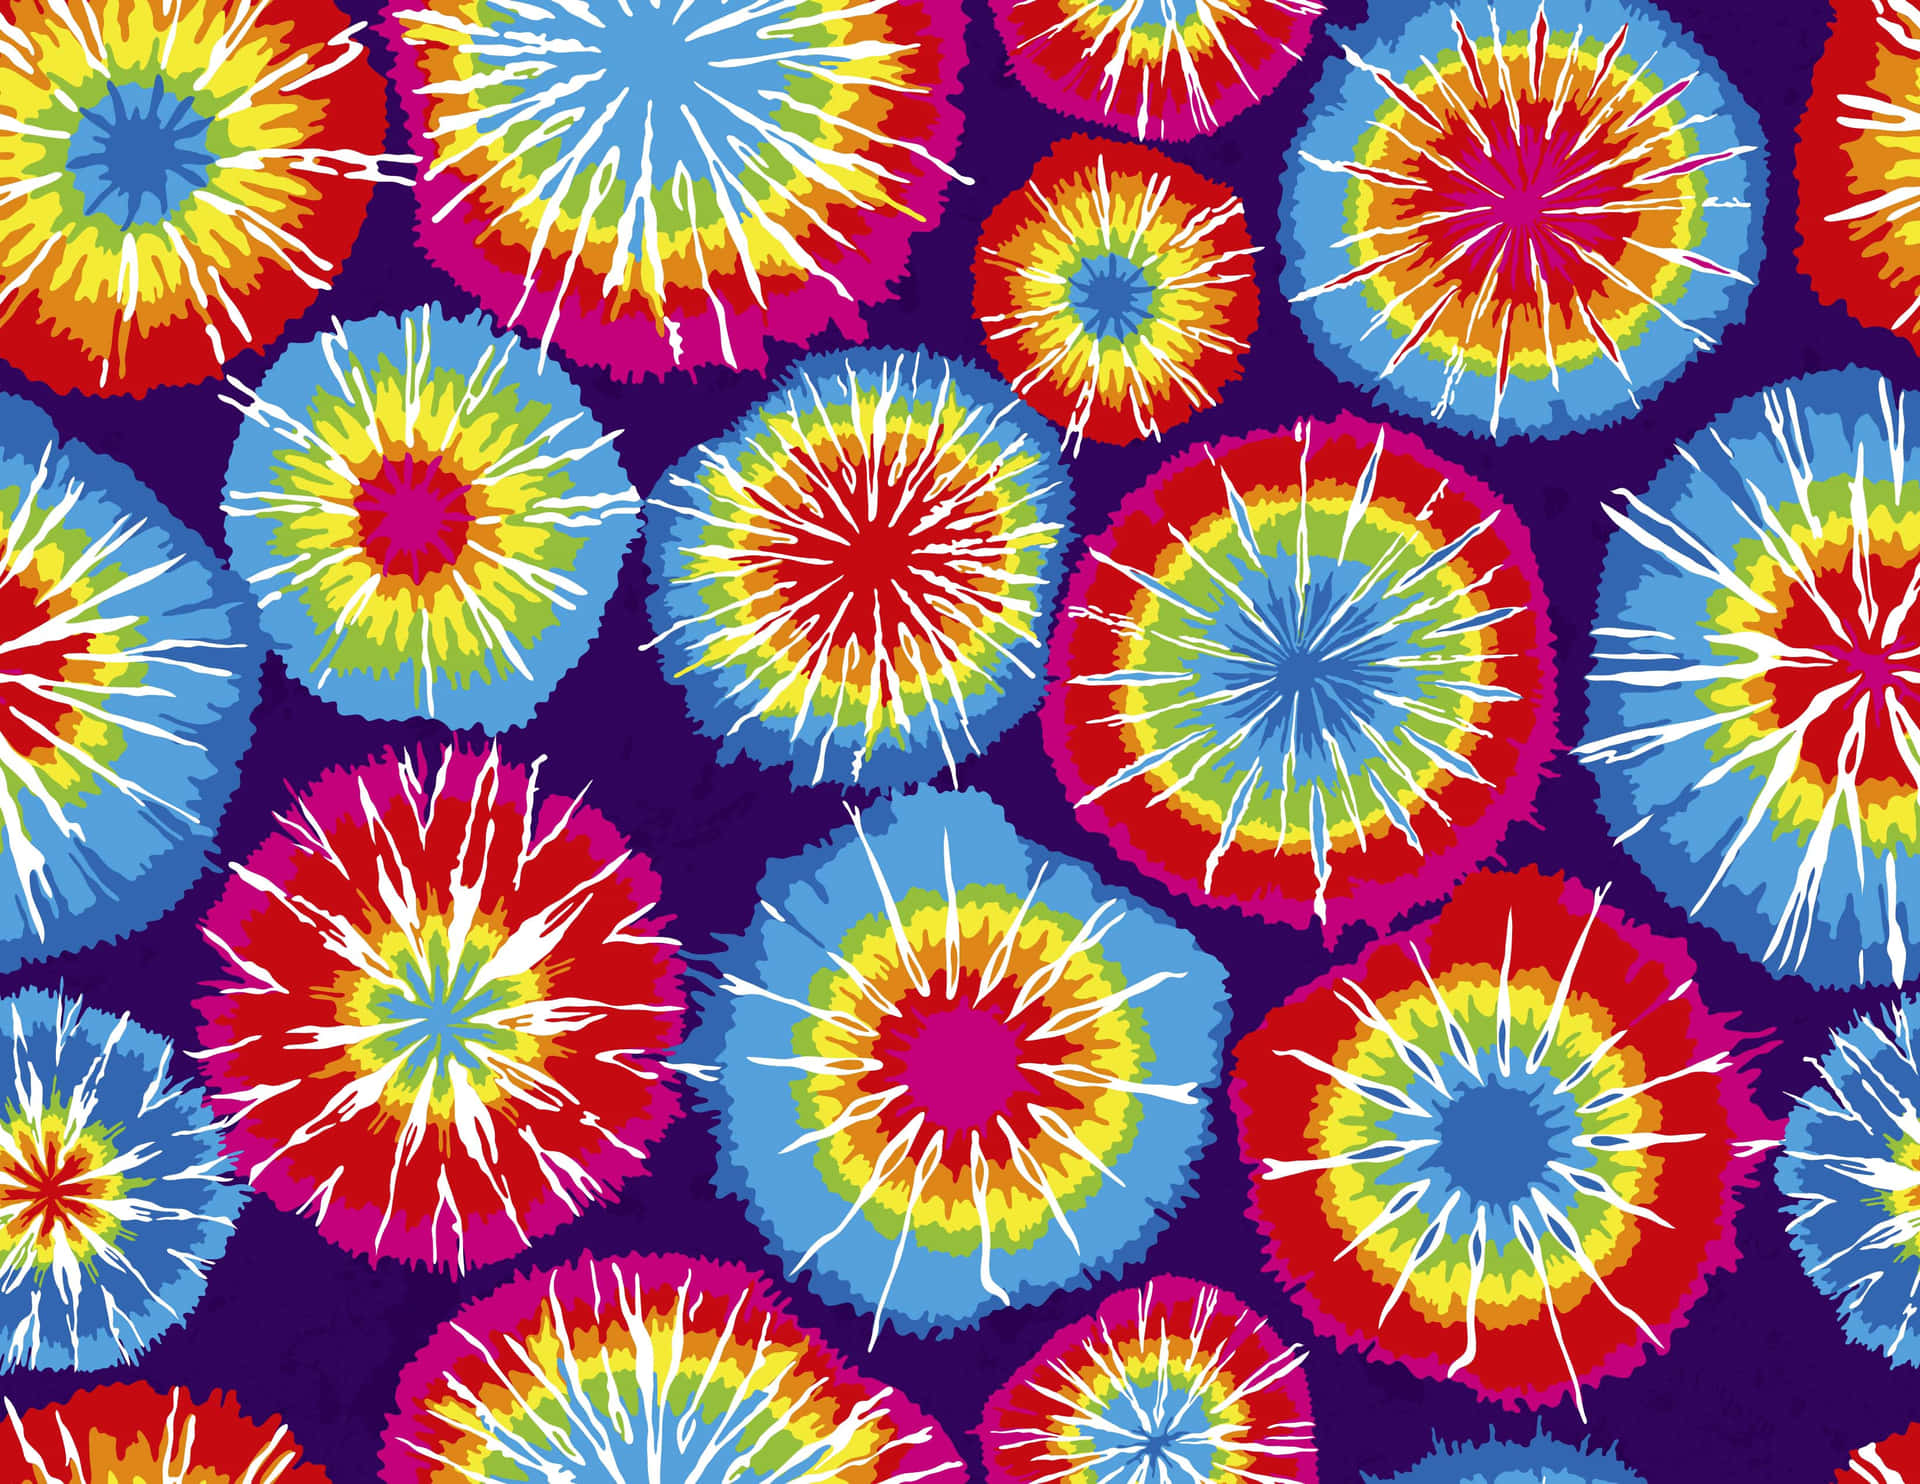 Bright and bold tie dye patterns.